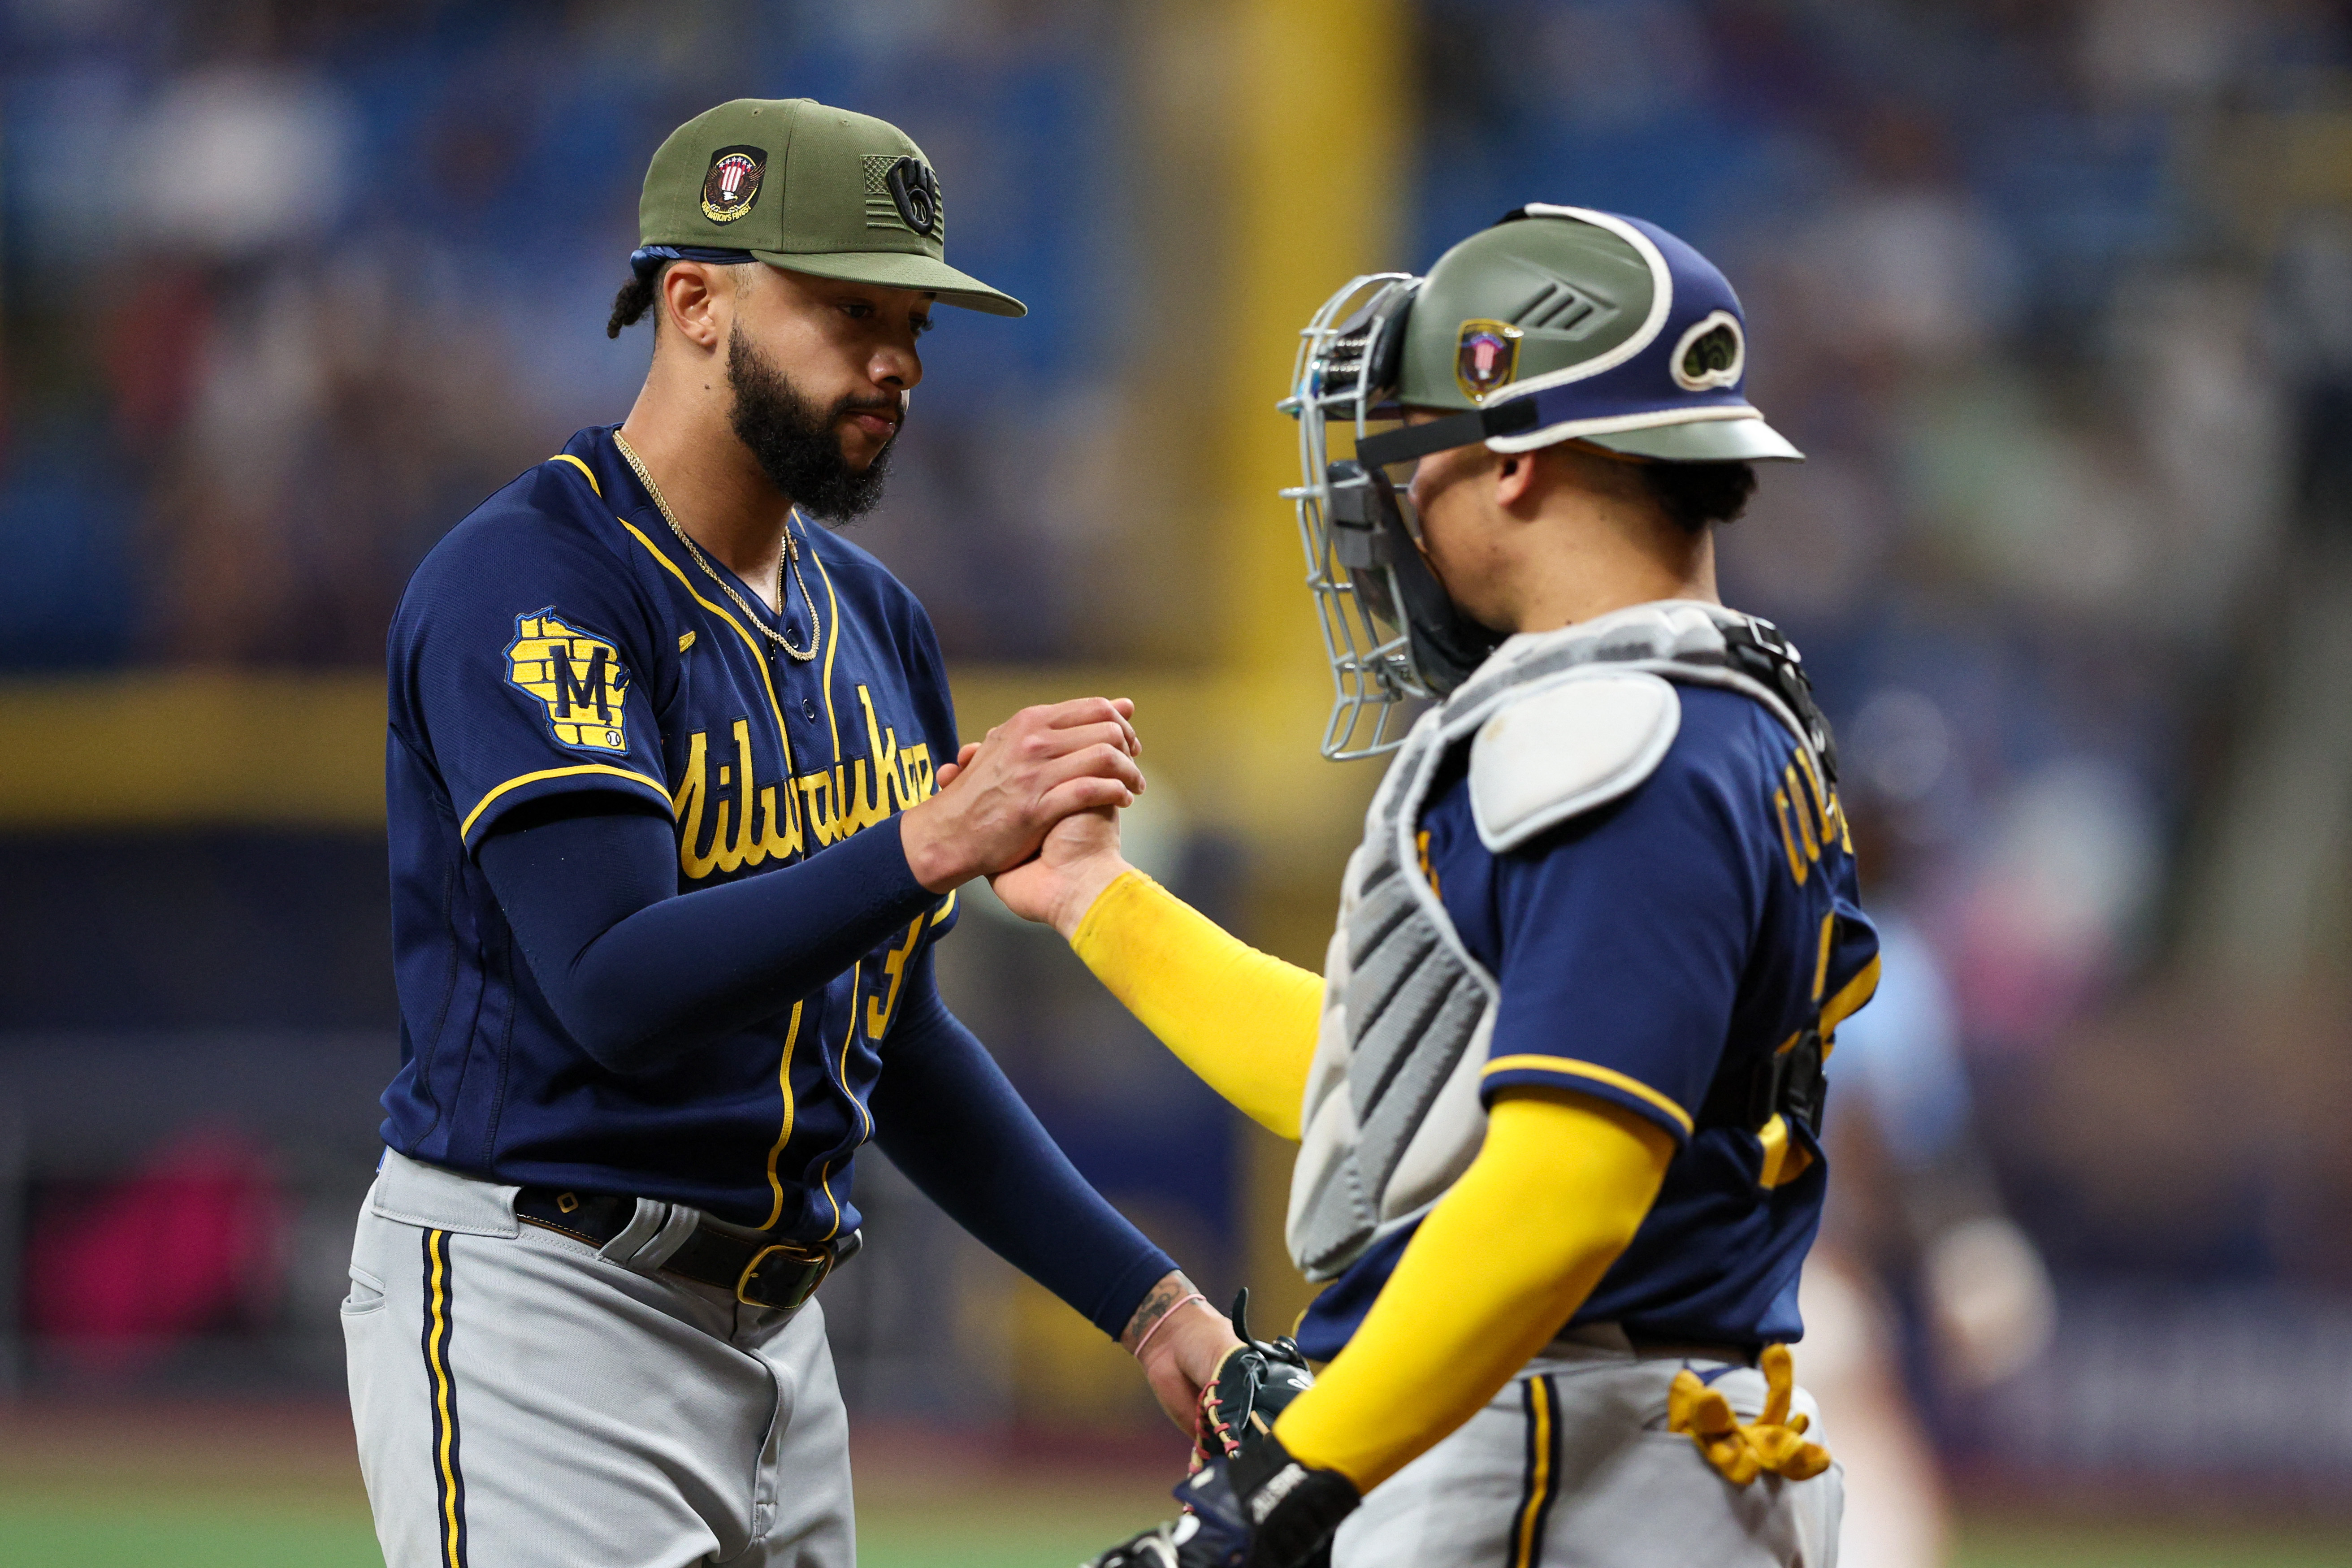 Brewers display power in handing Rays rare home loss